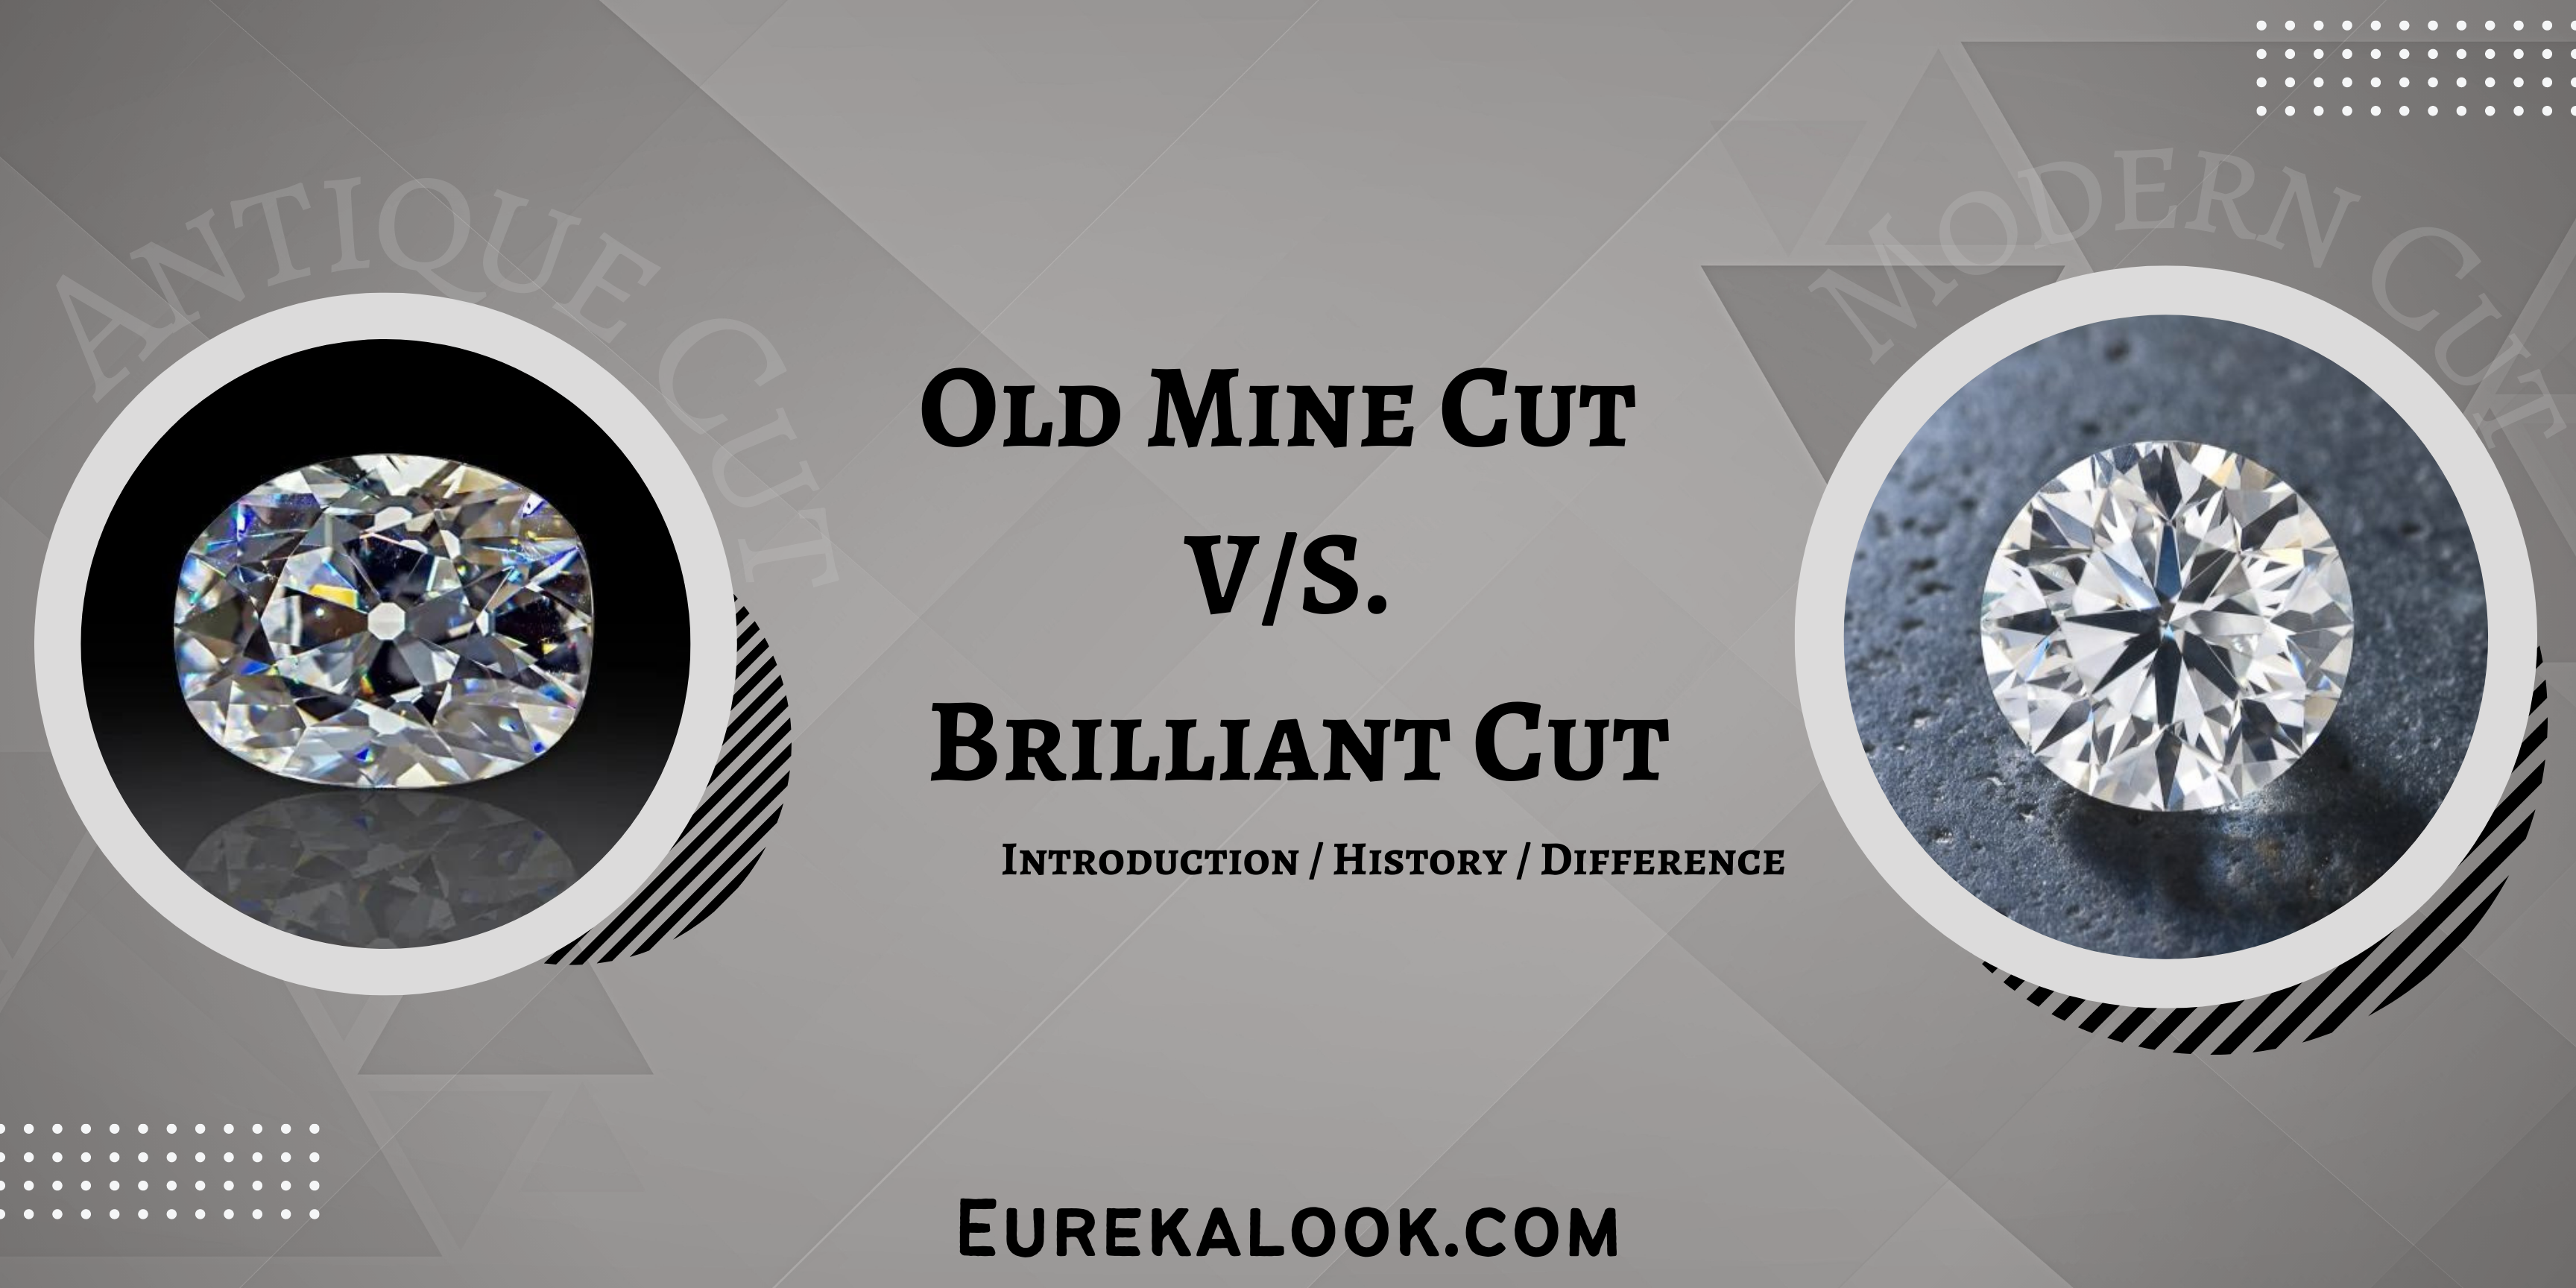 Difference Between Old mine Cut V/S Brilliant Cut